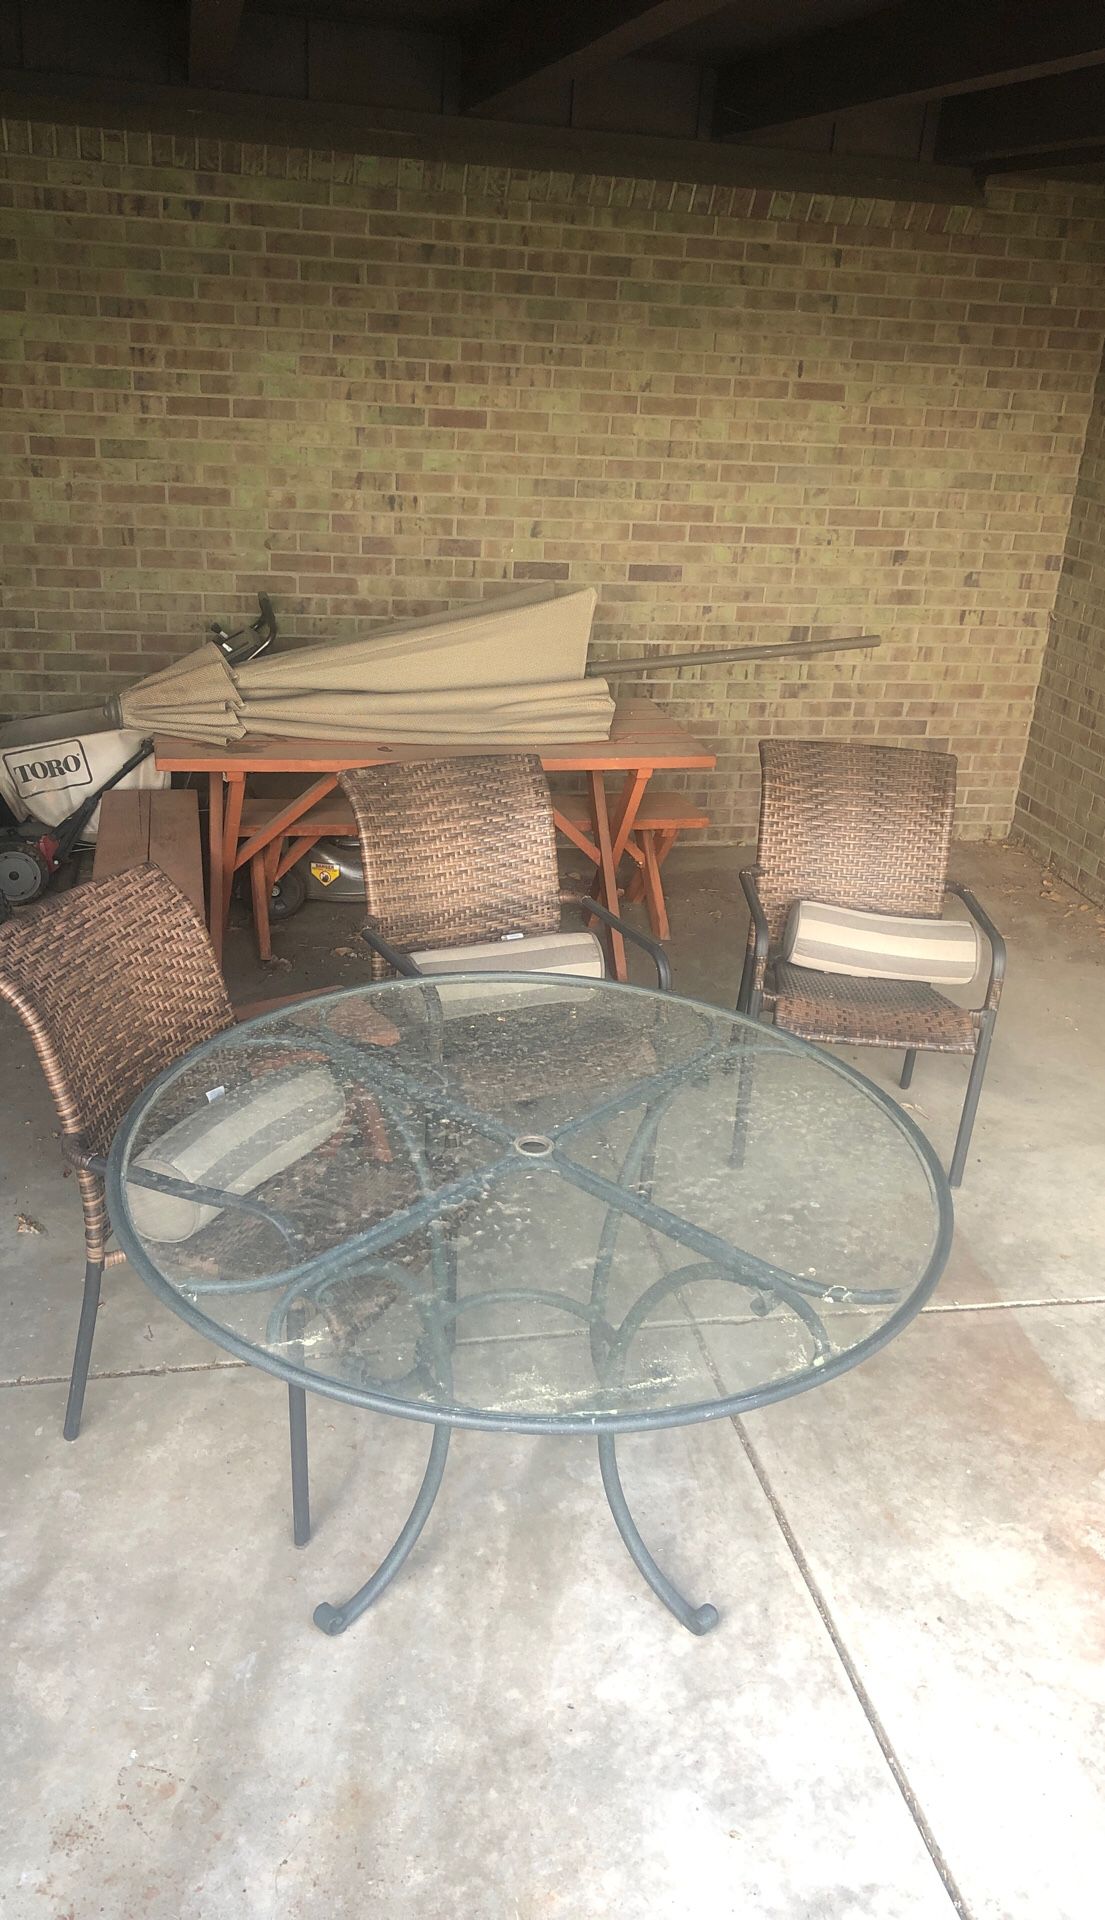 Patio set with umbrella and stand.